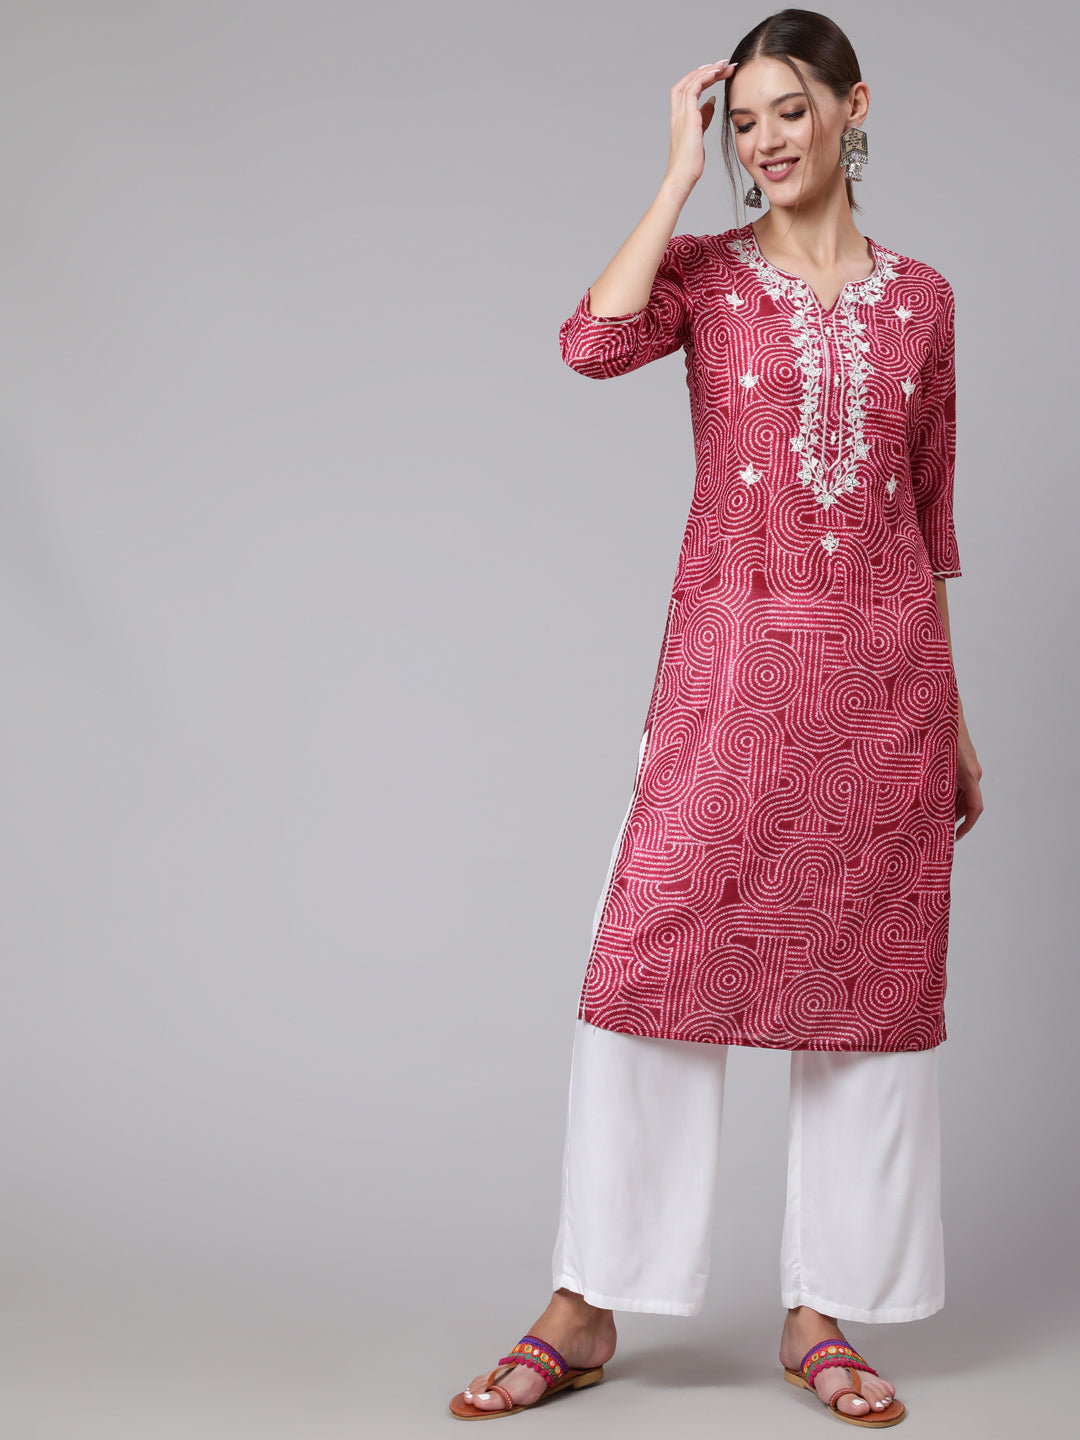 Red Color Geometric Digital Printed Muslin Kurta With Mirror Embroidered Neck, Has Three-Fourth Sleeves, Side Slits, Straight Hem And A Round Neck With A Slight V Opening